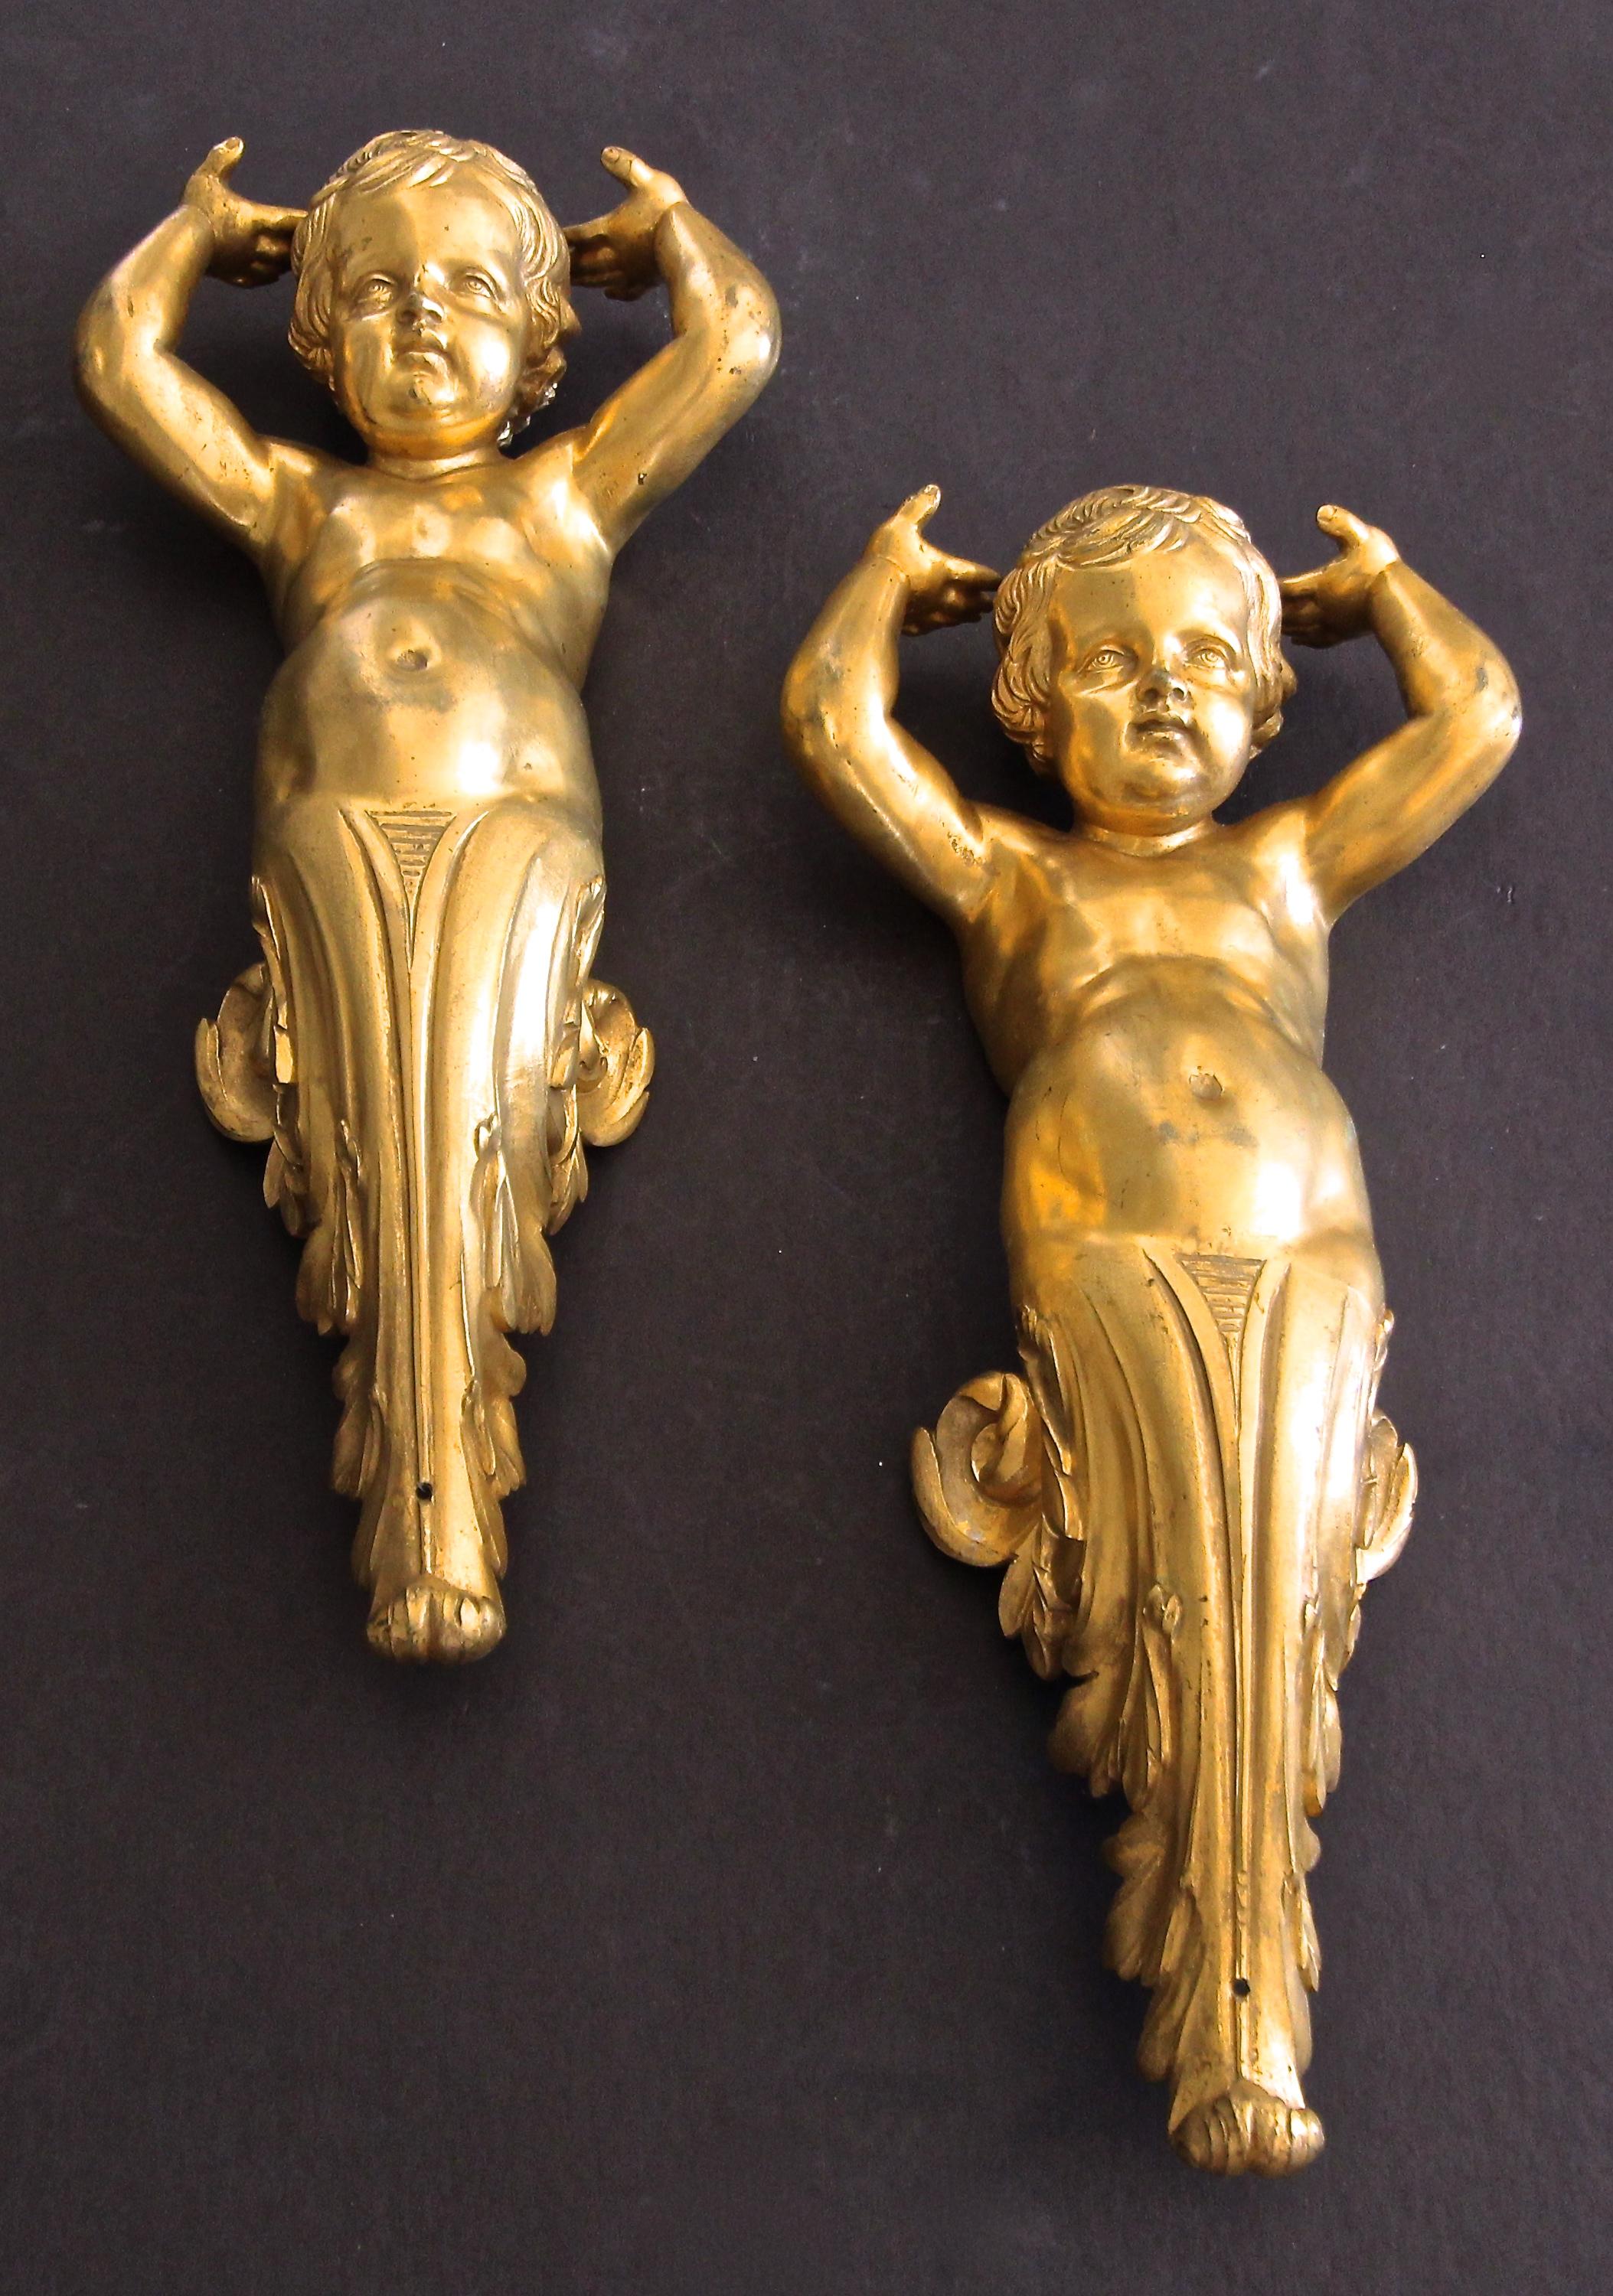 Incredible pair of finely detailed doré bronze putti cherub architectural elements. Can be used as wall brackets or you can have mounted on acrylic stands and displayed.